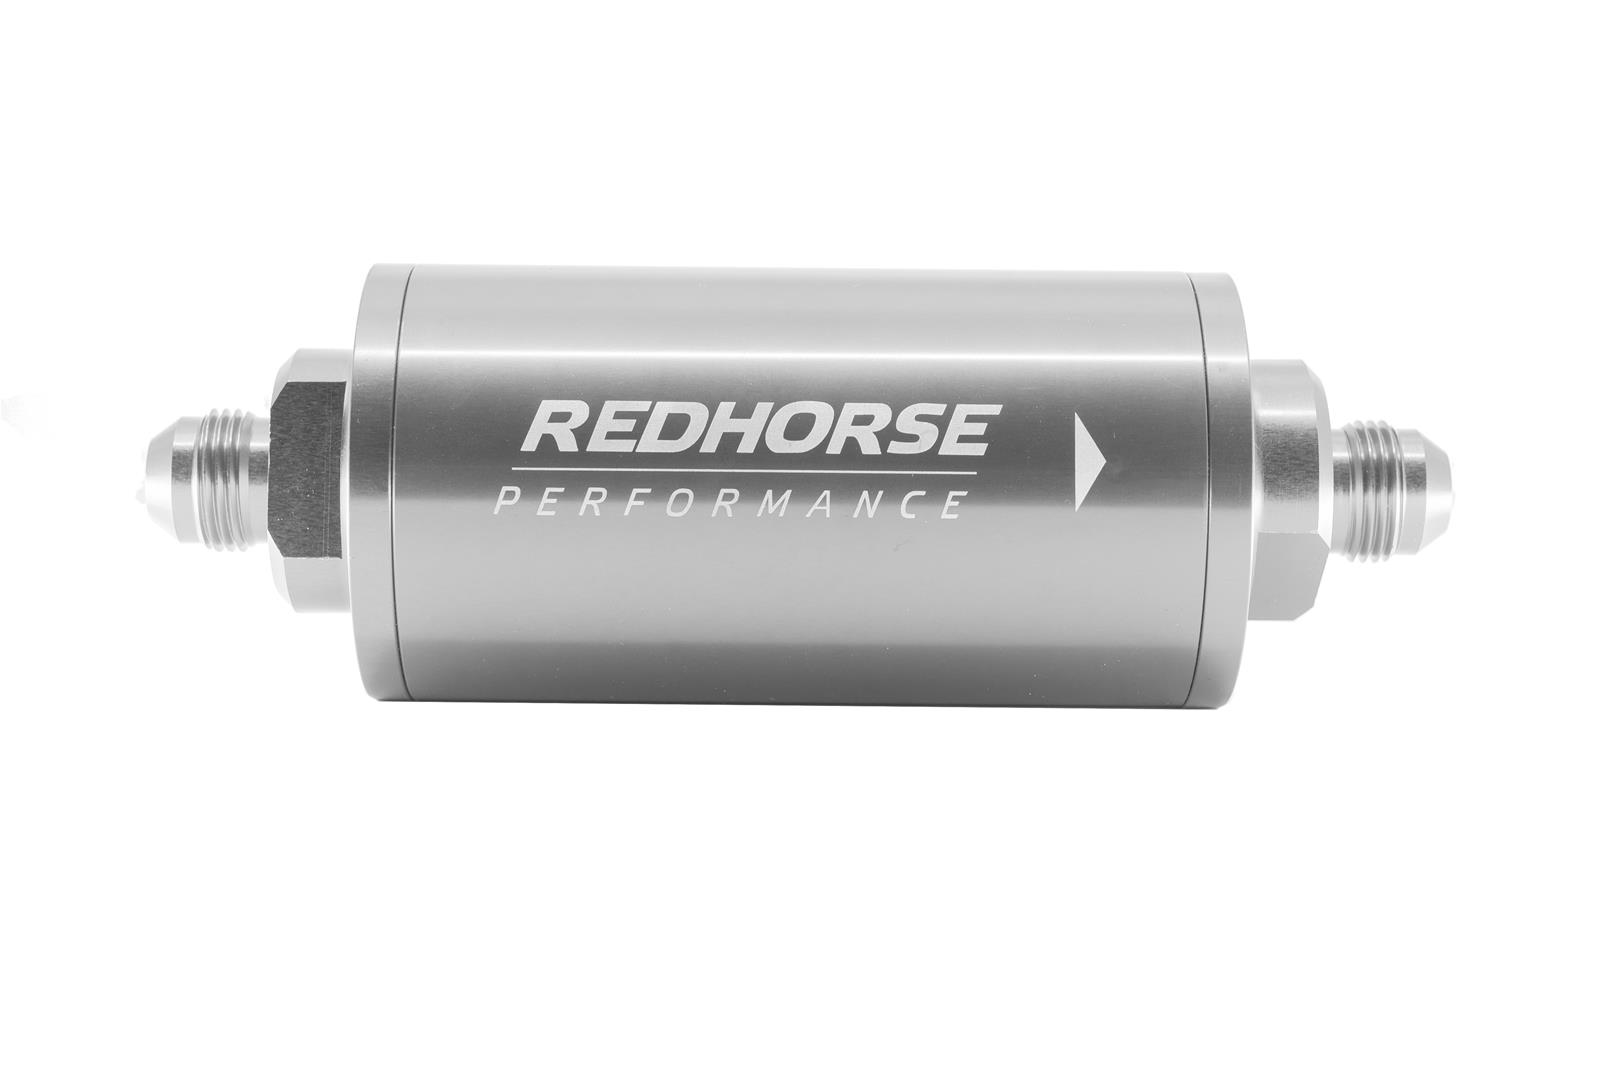 Redhorse Performance 4651-06-5-12 6in Cylindrical In-Line Race Fuel Filter w/ 12 Micron Fiberglass element - 06 AN